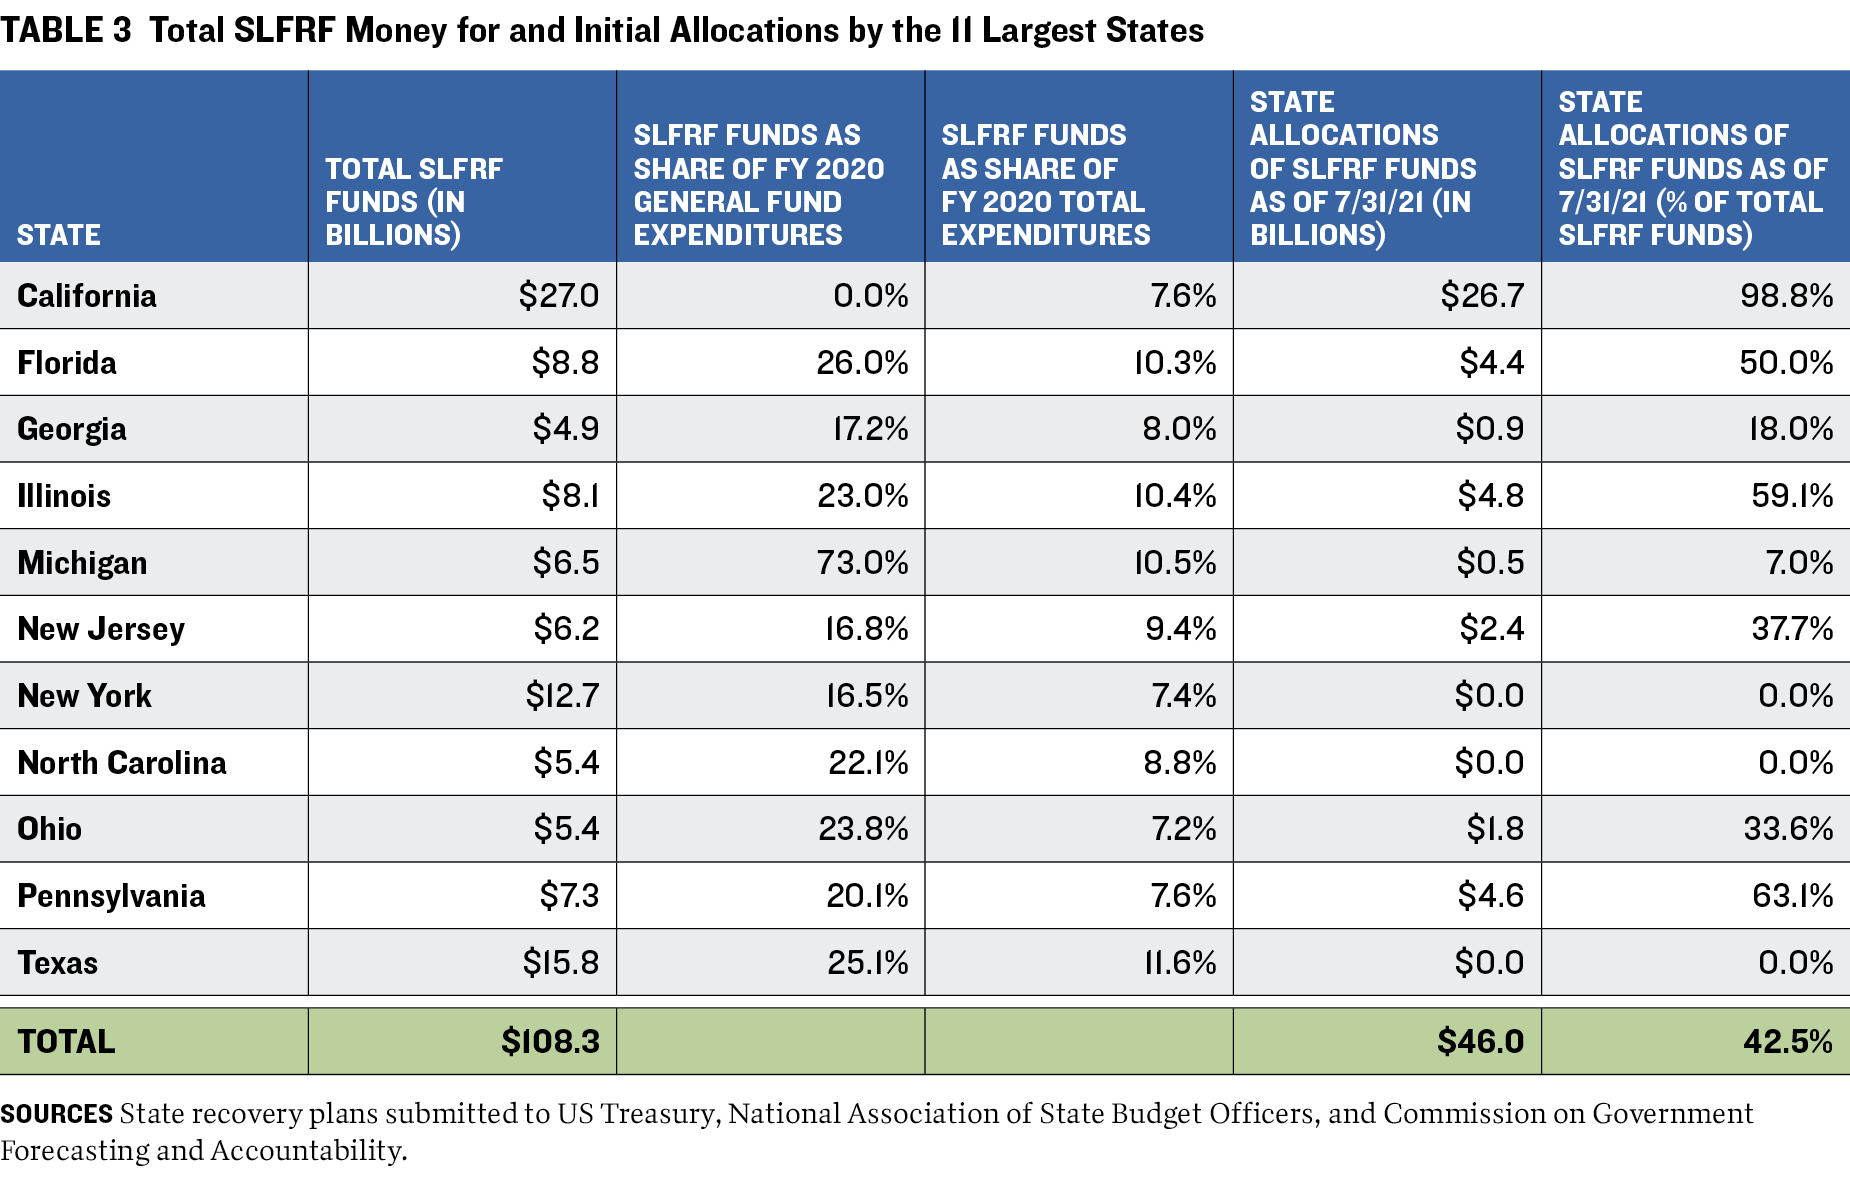 TABLE 3 Total SLFRF Money for and Initial Allocations by the 11 Largest States